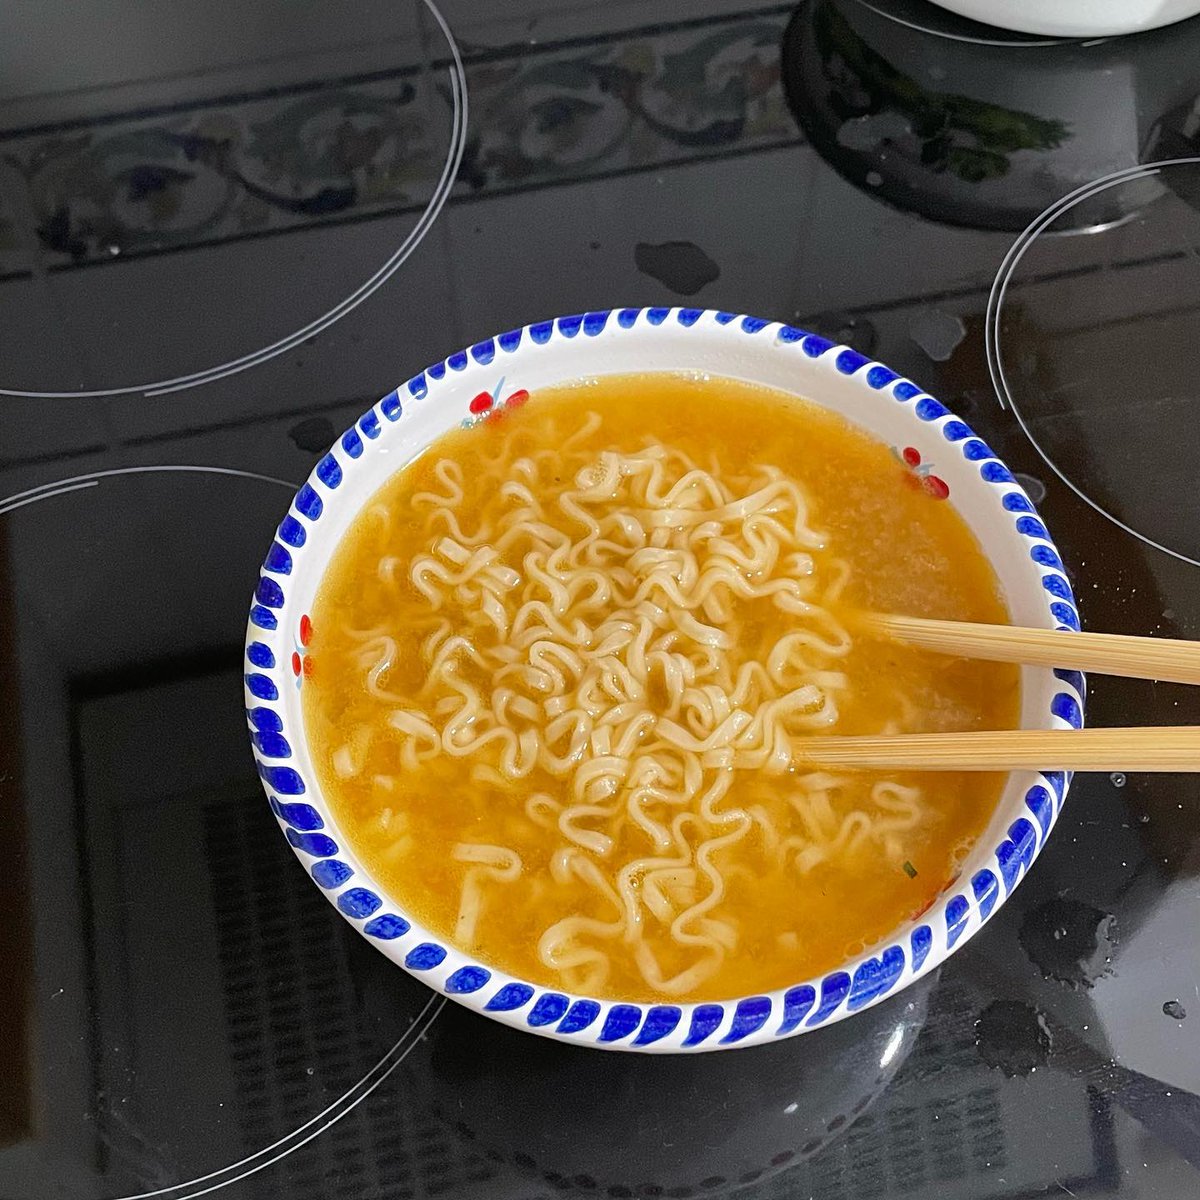 Noodles for lunch today. It's my favorite lunch. 😋😊#Trump2024 #MAGA #lunchtime #favouritefood